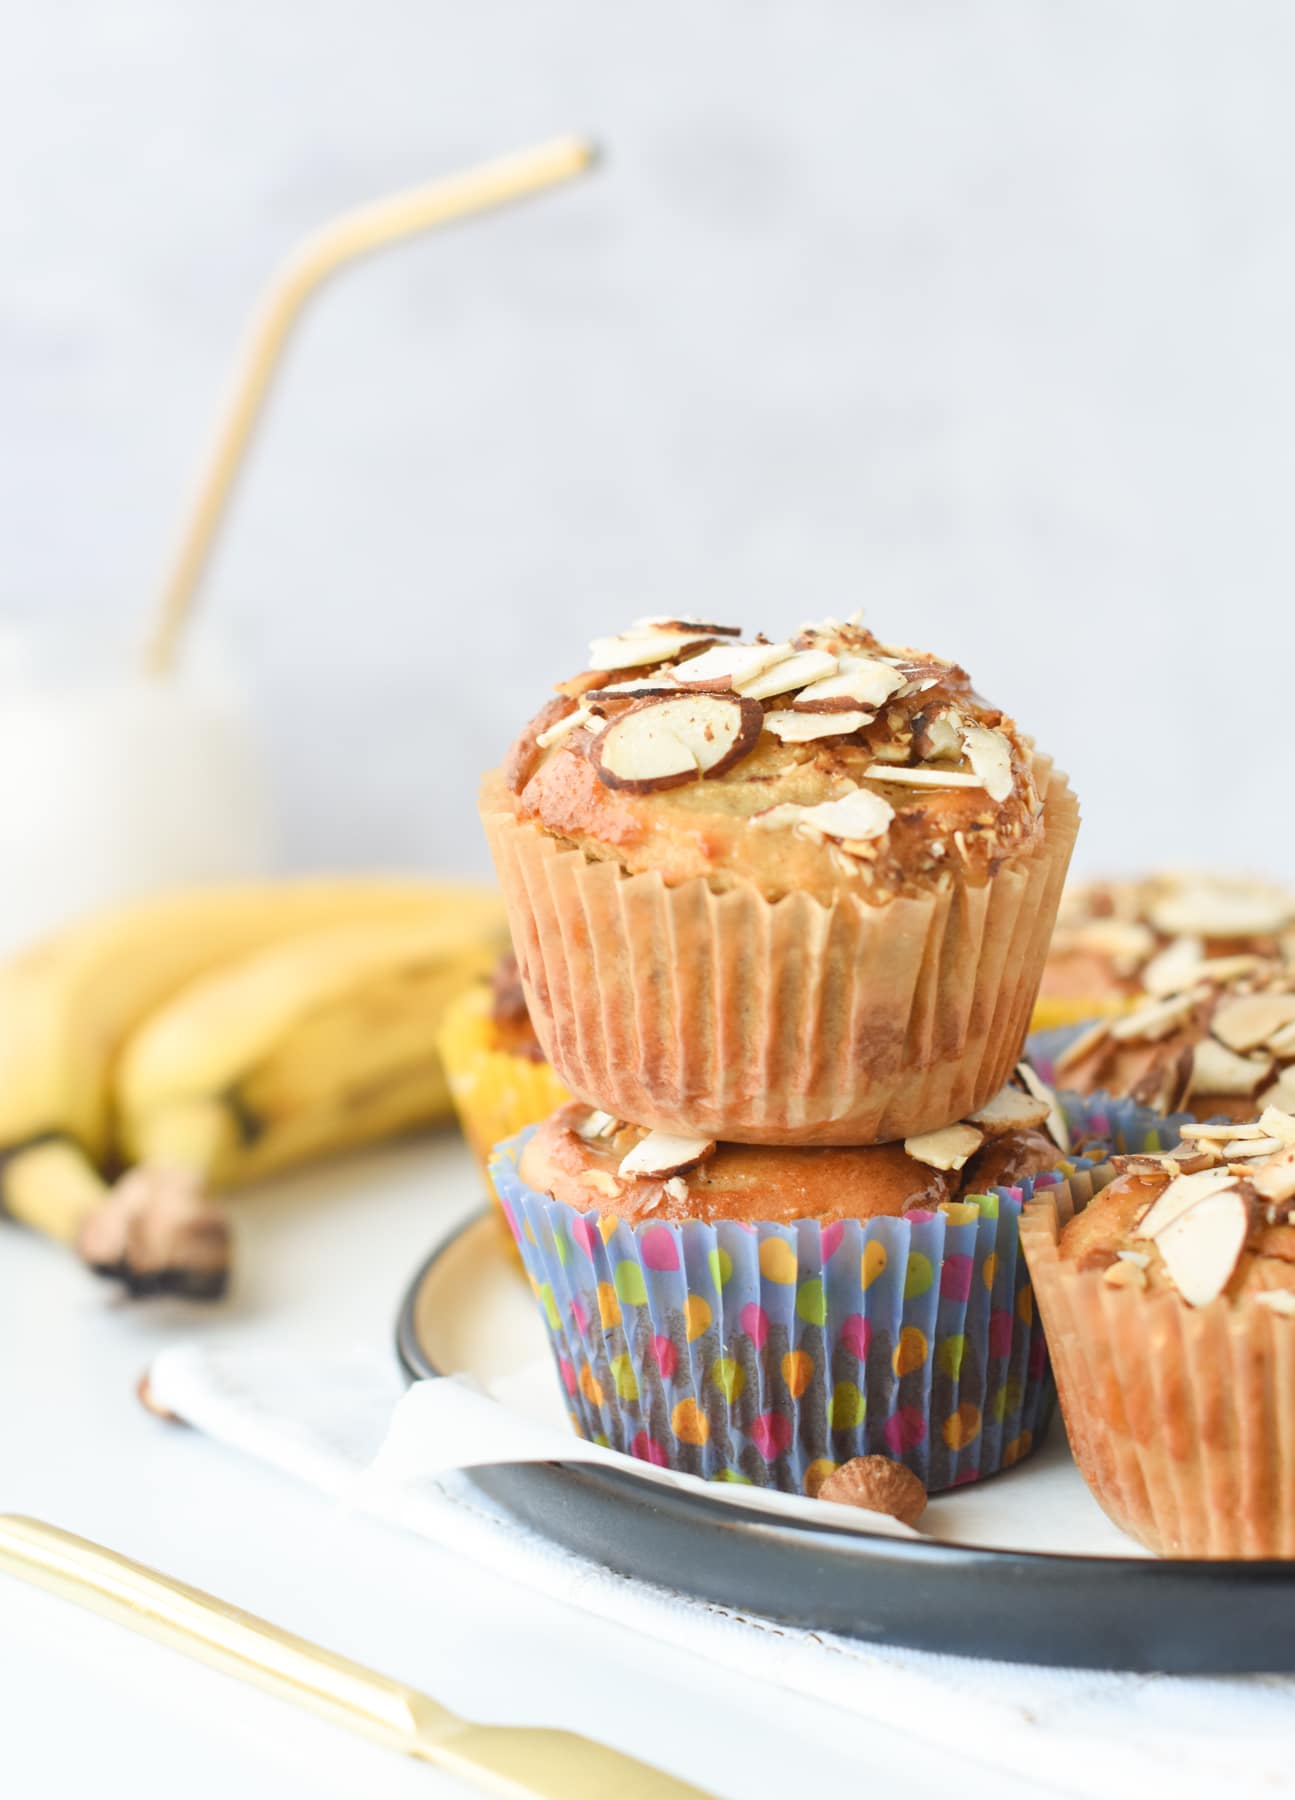 Banana muffin with almond flour